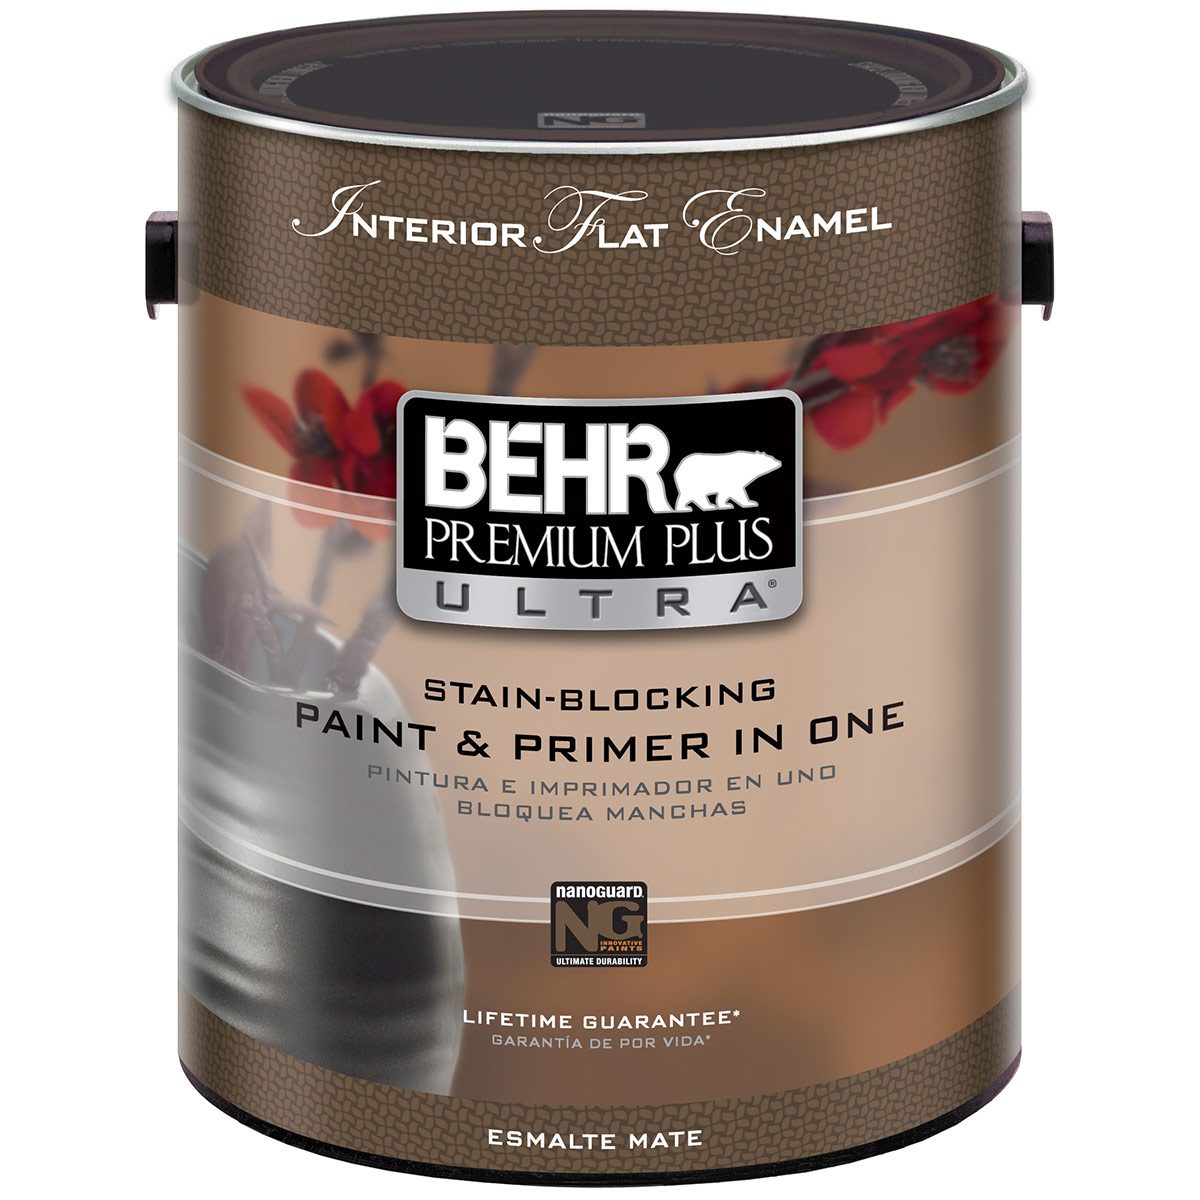 Behr paint and primer in one